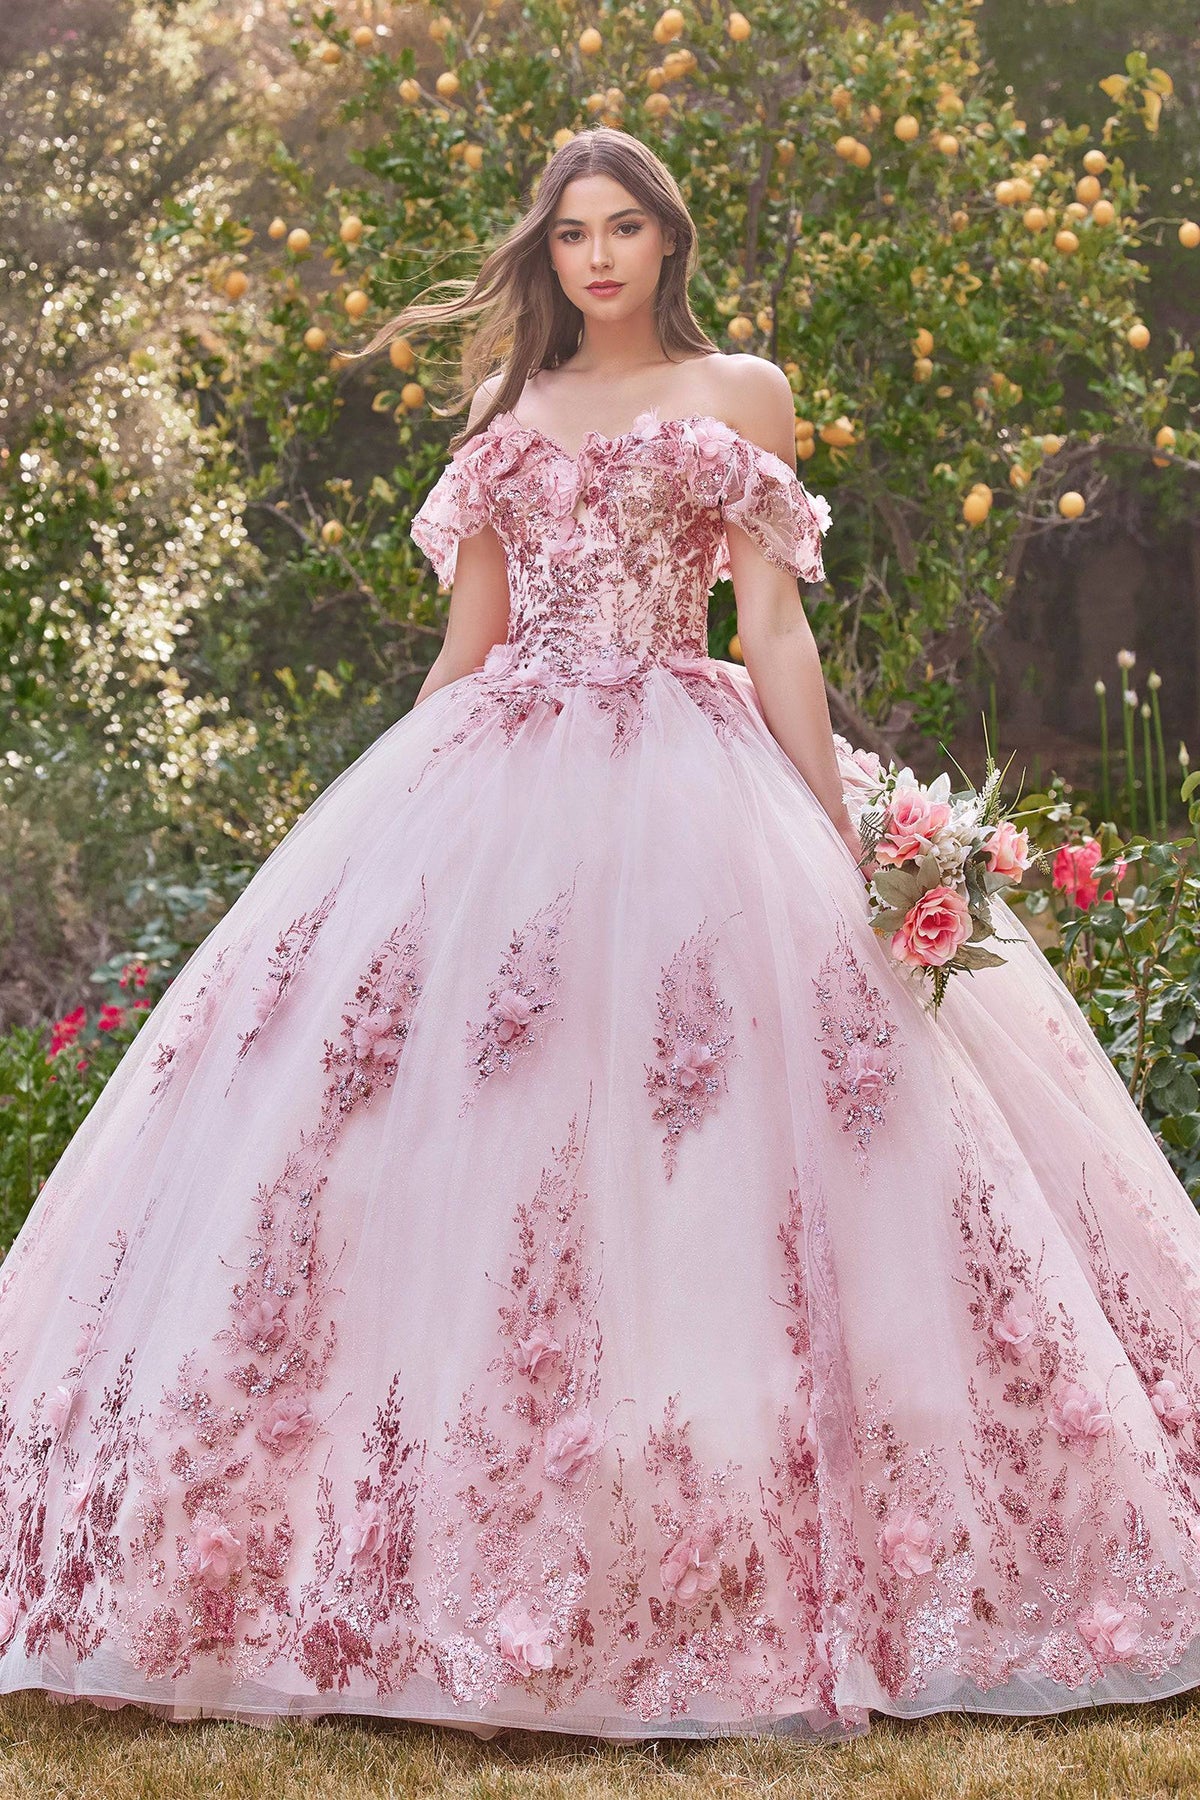 Cinderella Divine 15701 Quinceanera Ball Gown - Quinceanera Dress - Norma Reed - NORMA REED